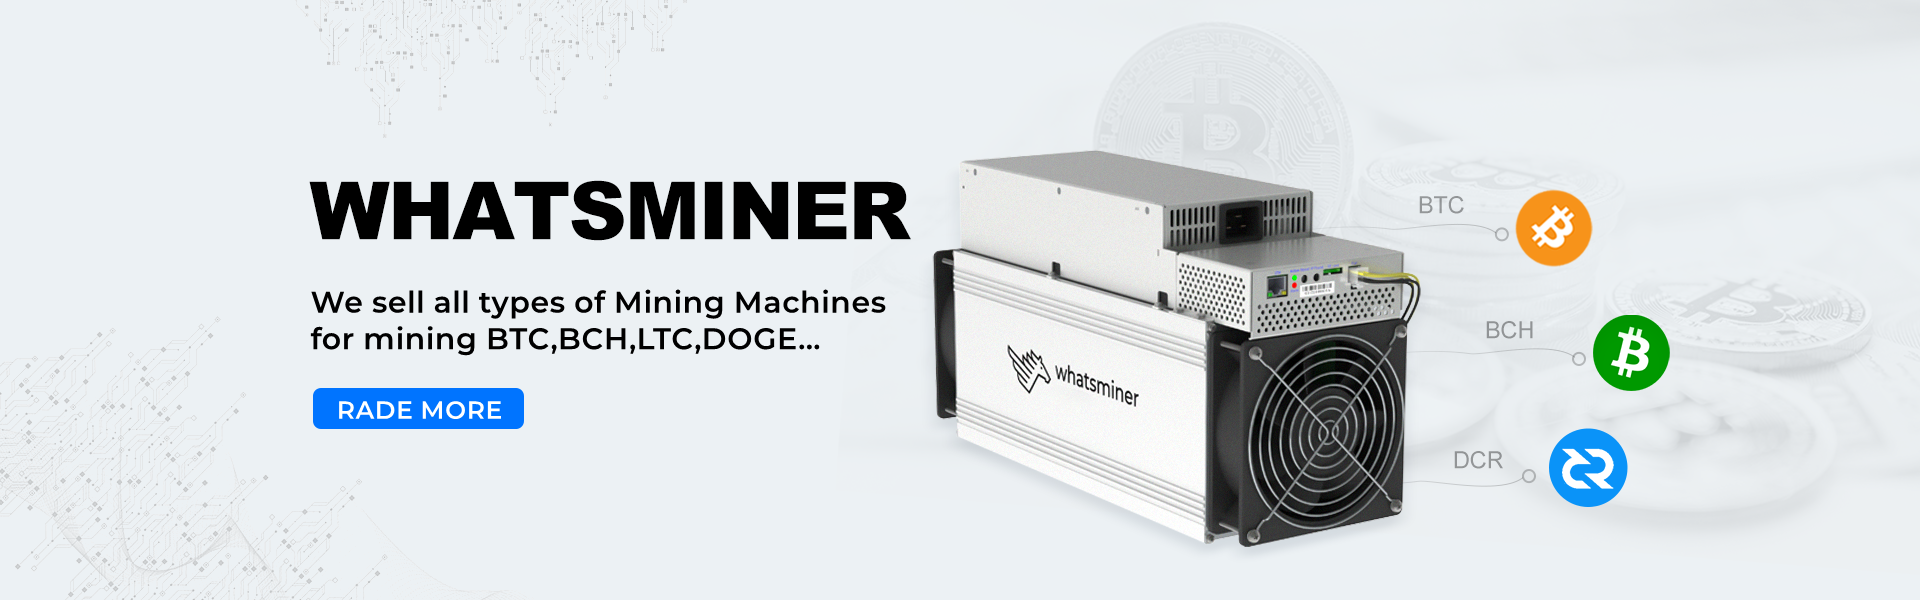 I-PC端WHATSMINER_副本